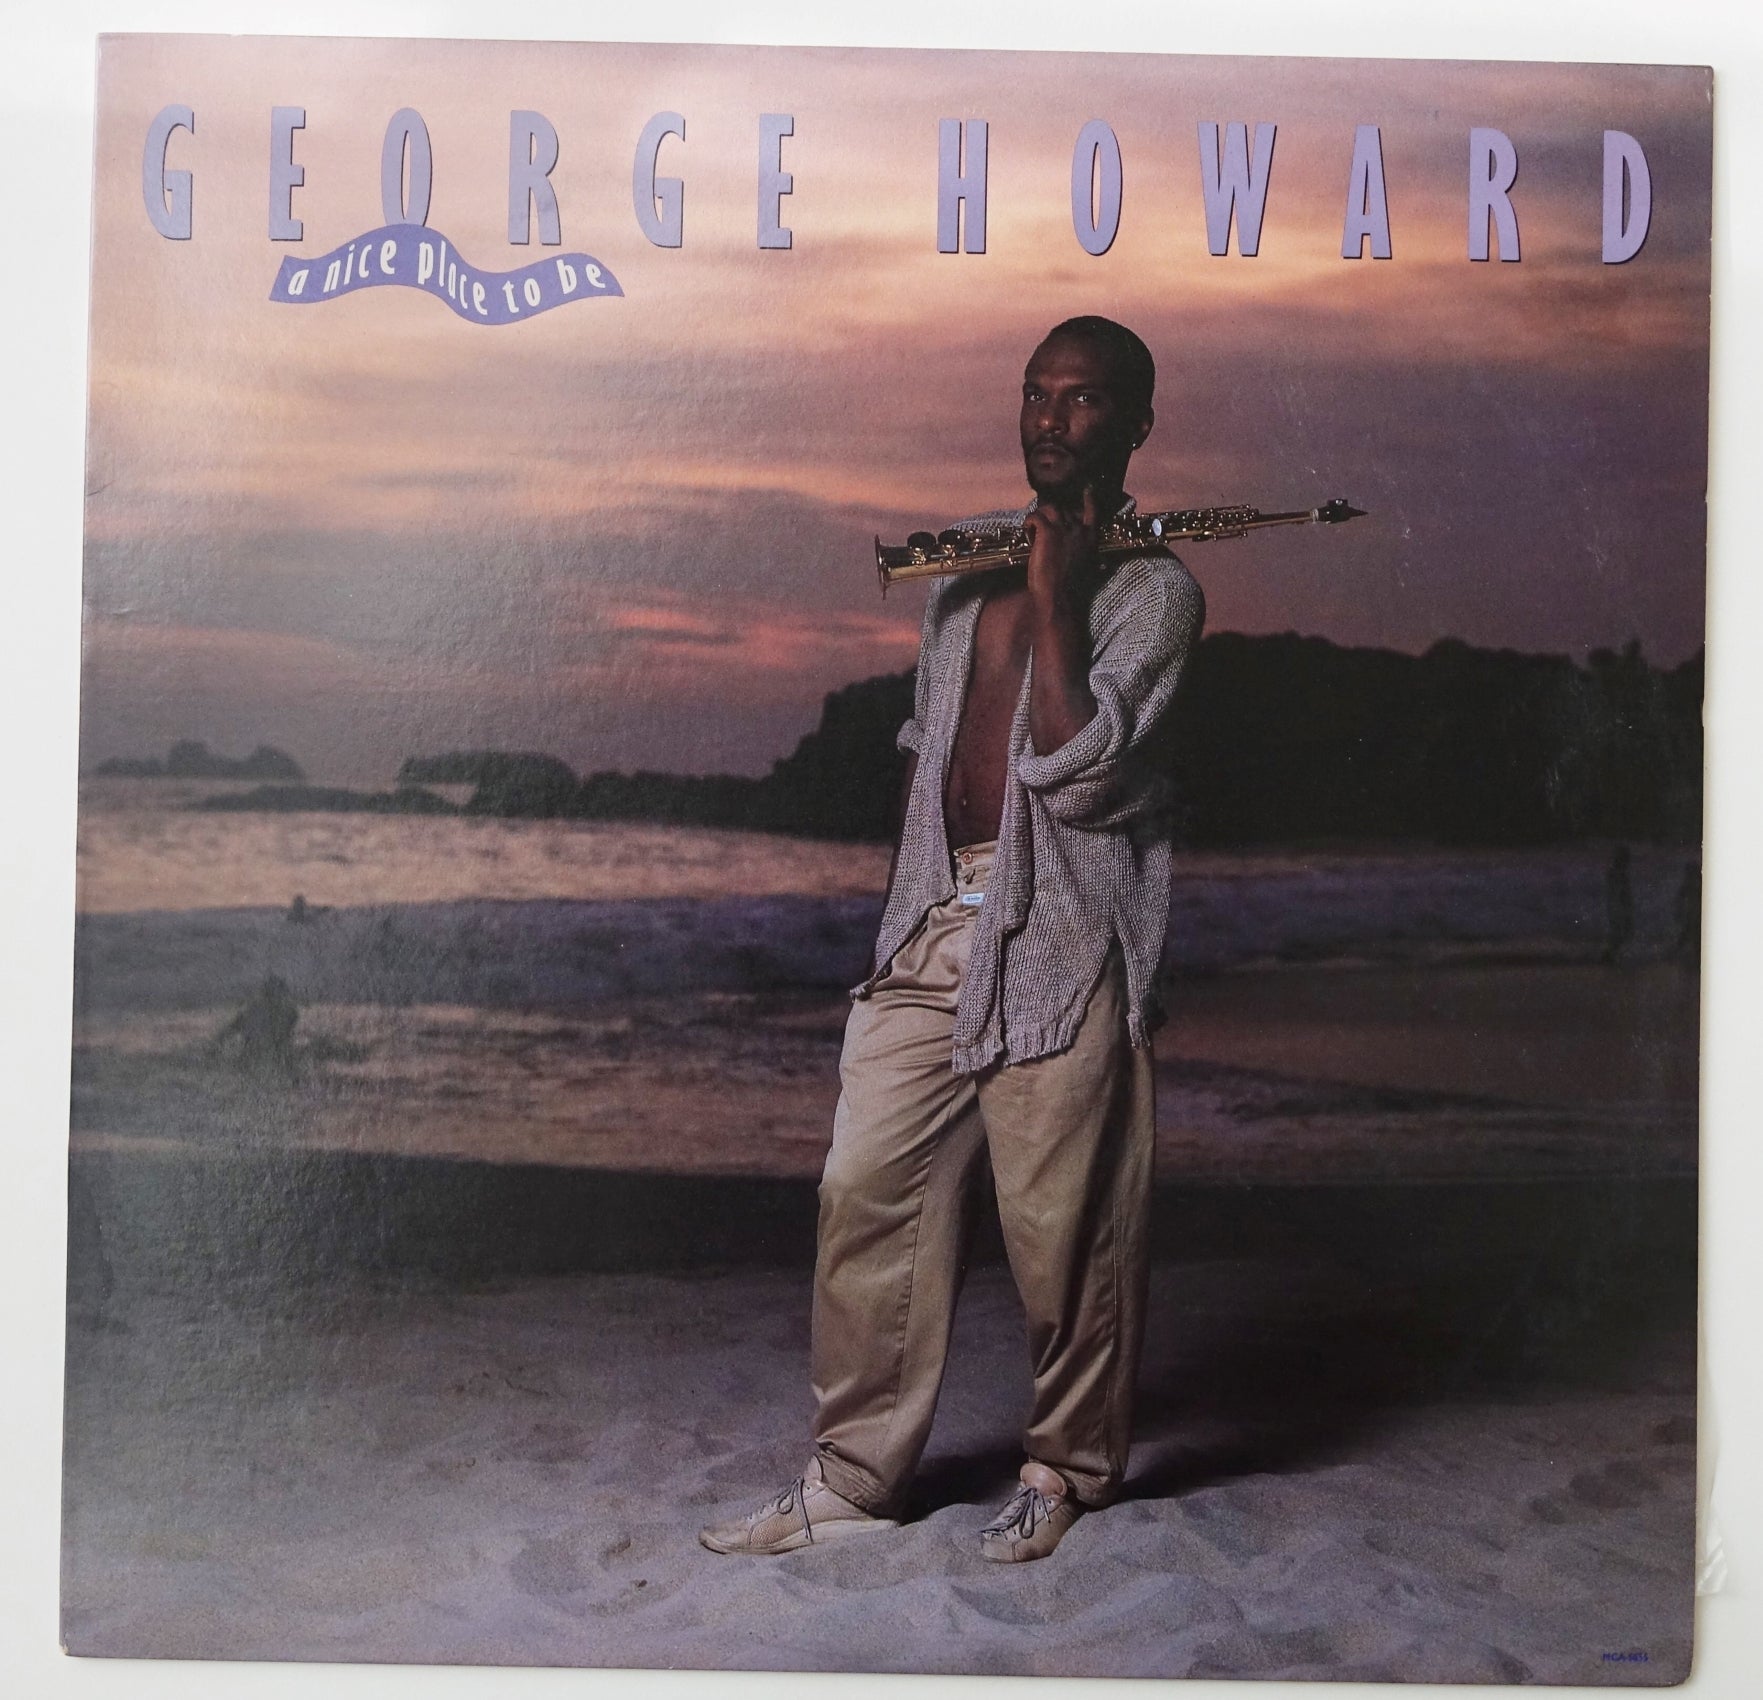 MCA001: George Howard - A Nice Play to Be